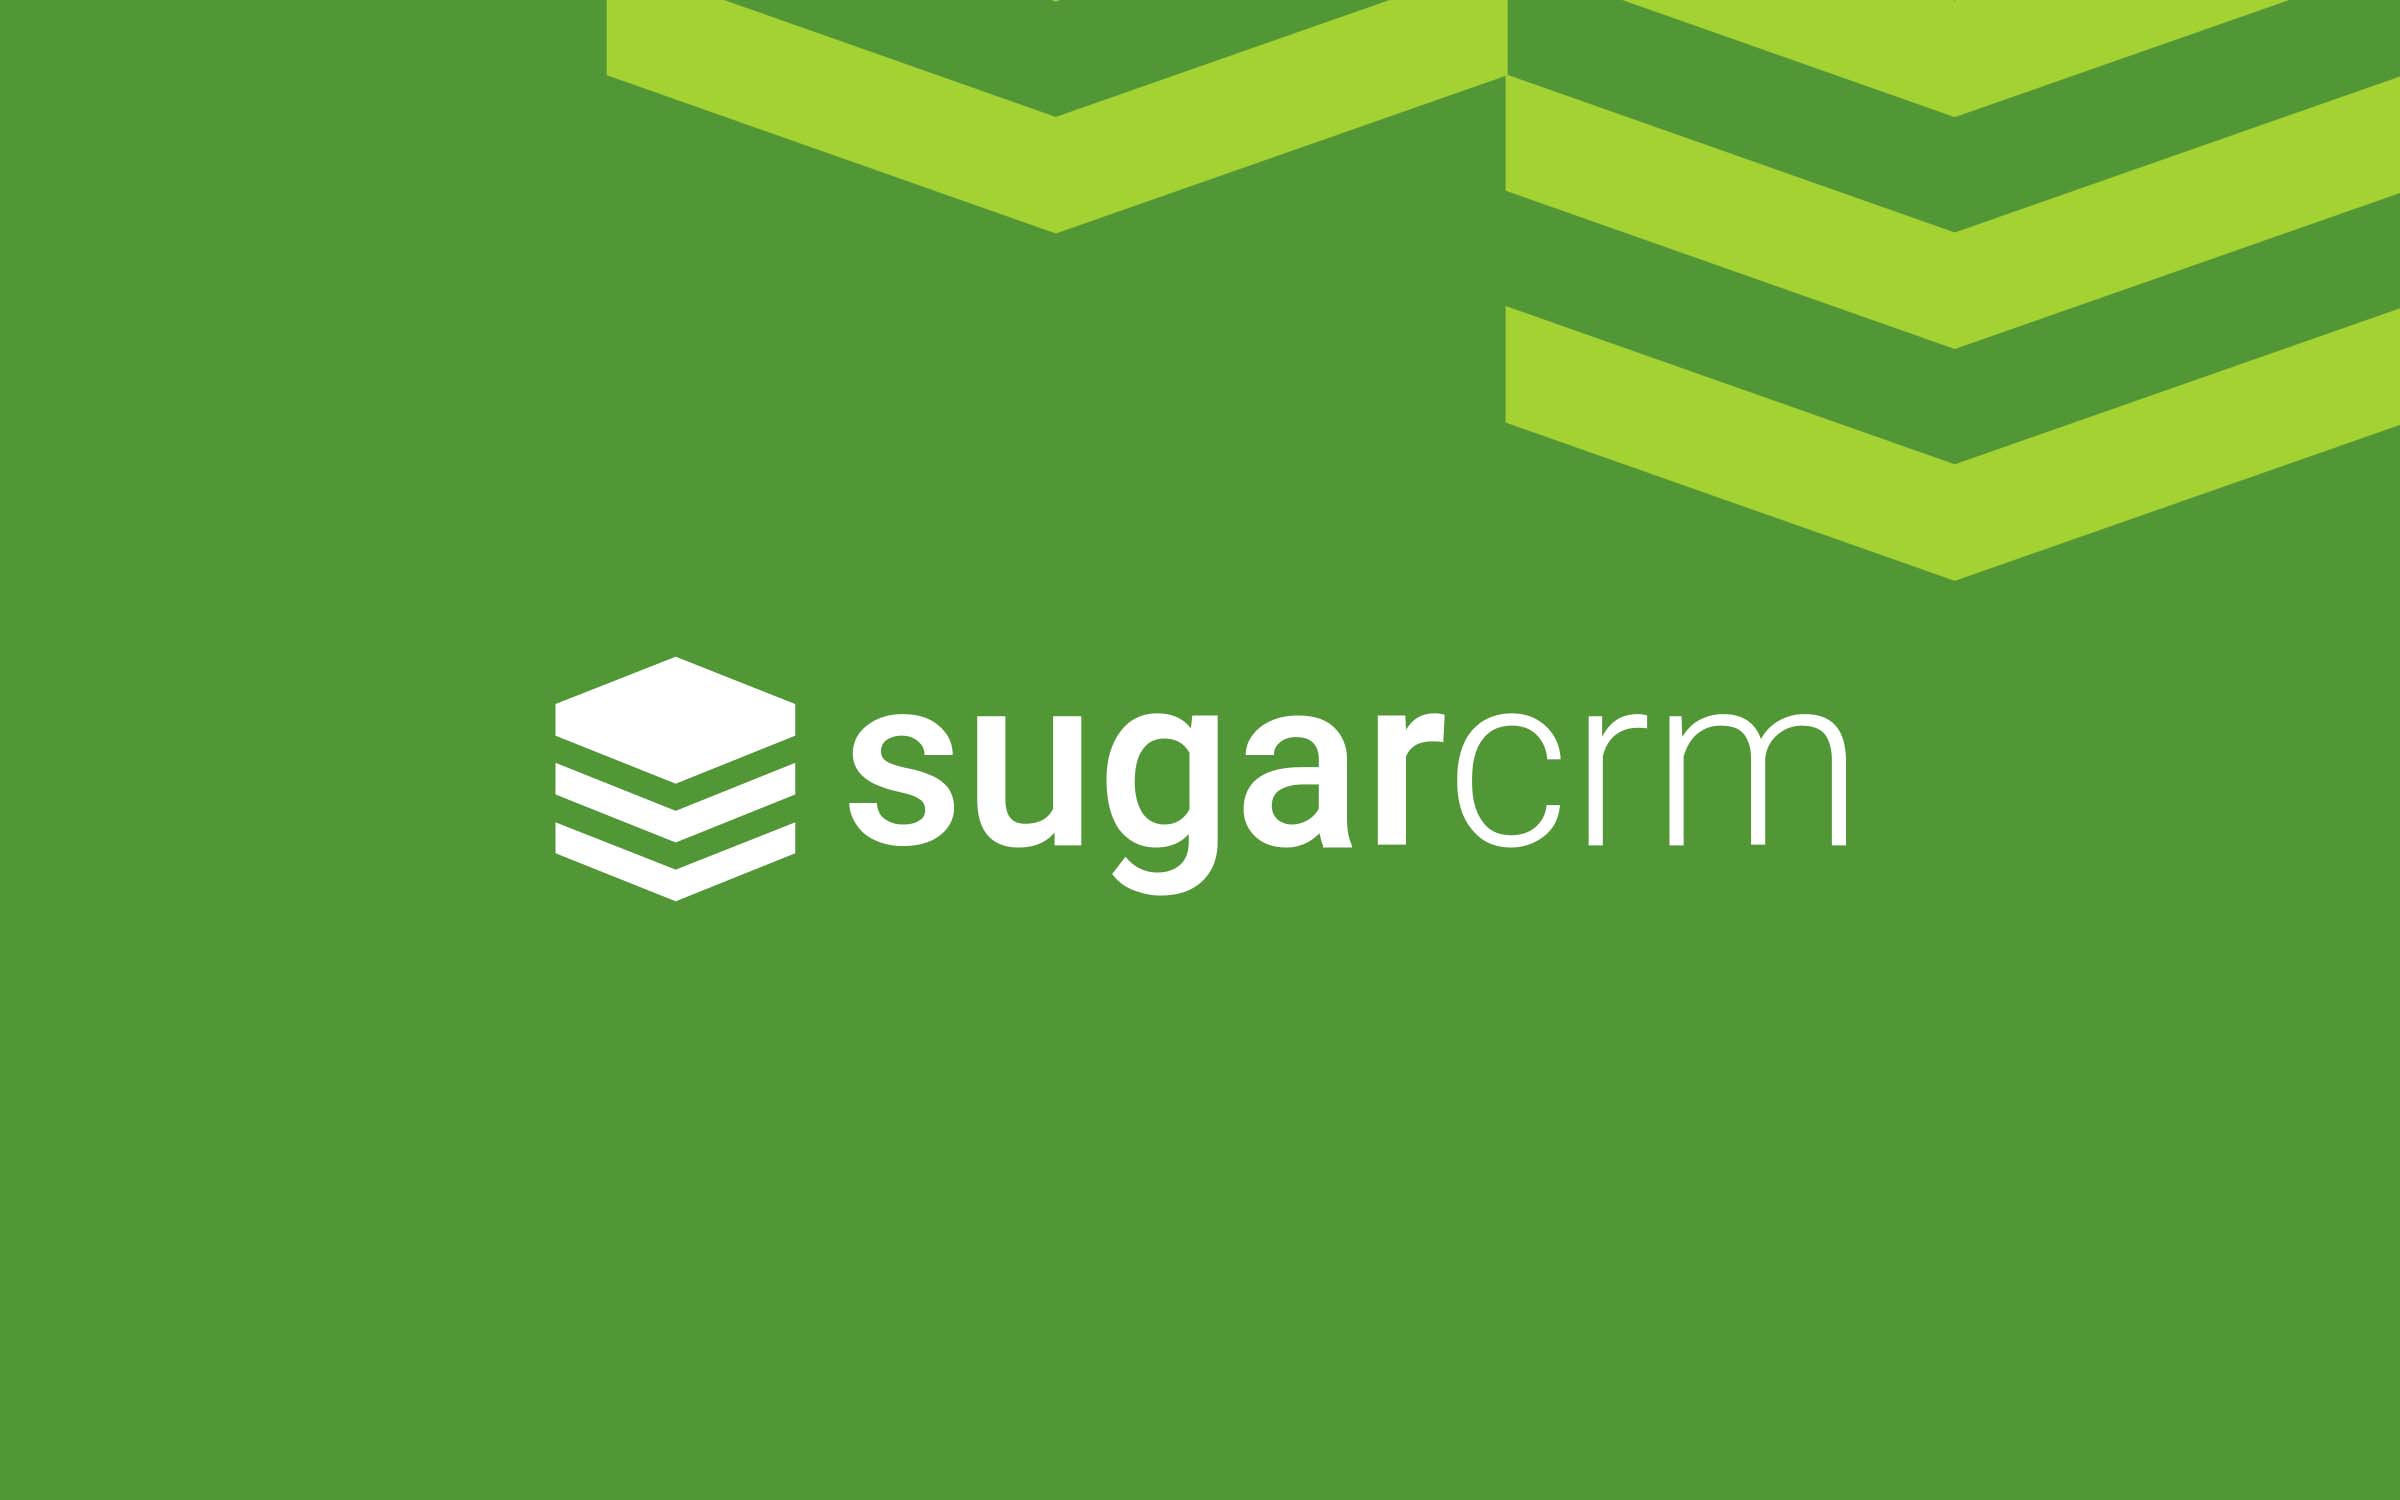 SugarCRM Recognized for Excellence in Best Relationship Management Solution Category in the 2023 American Business Awards